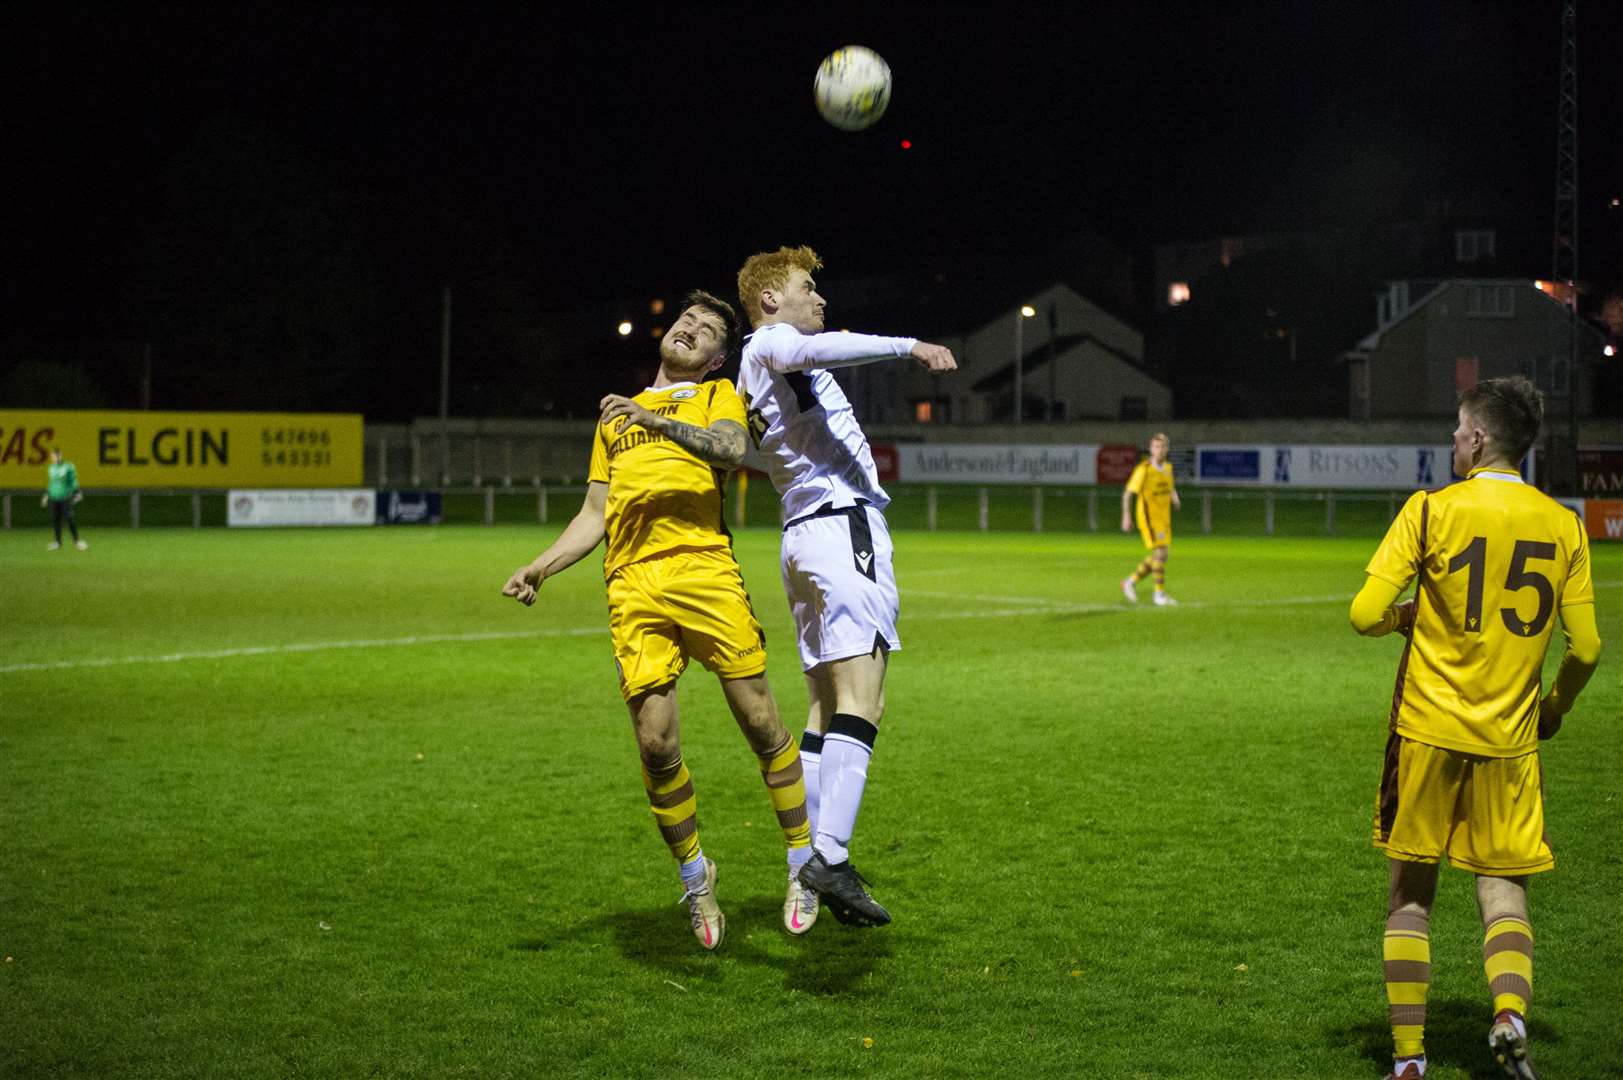 Forres' Martin Groat and Rothes' Greg Morrison challenging for the ball in the air. Picture: Becky Saunderson